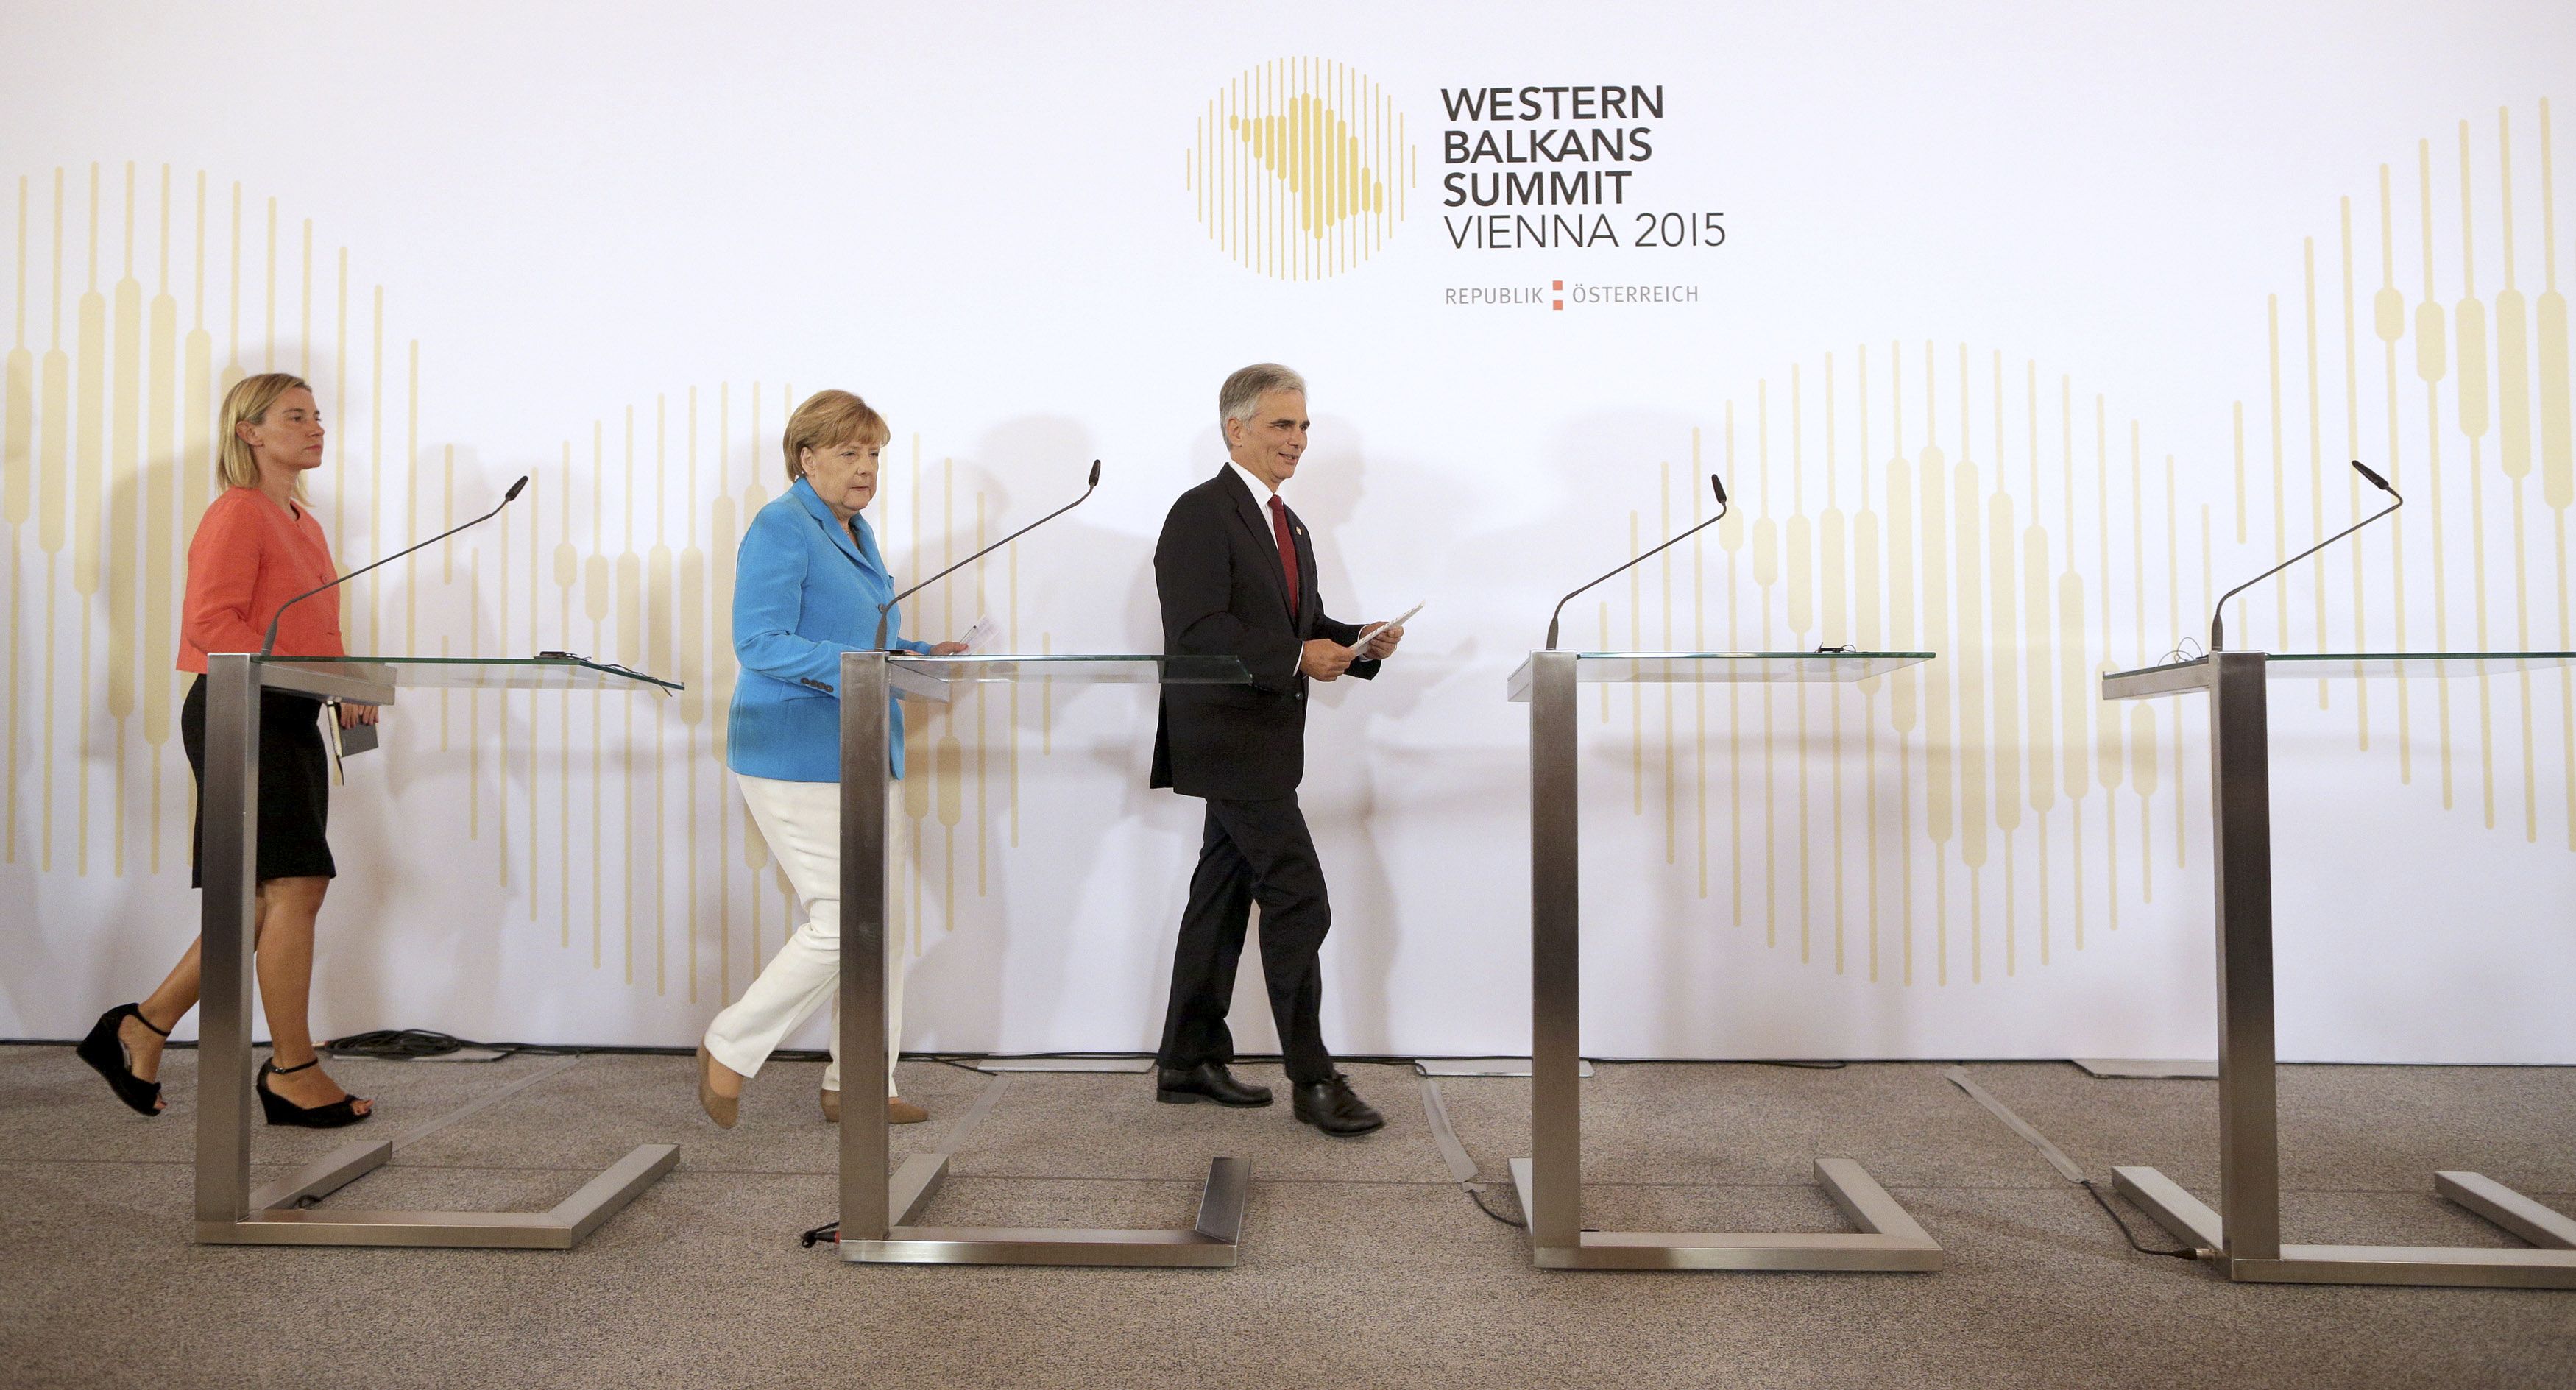 Austrian Chancellor Werner Faymann, German Chancellor Angela Merkel, and European Union Foreign Policy Chief Federica Mogherini arrive for a news conference during the Western Balkans Summit in Vienna August 27, 2015. REUTERS/Lisi Niesner